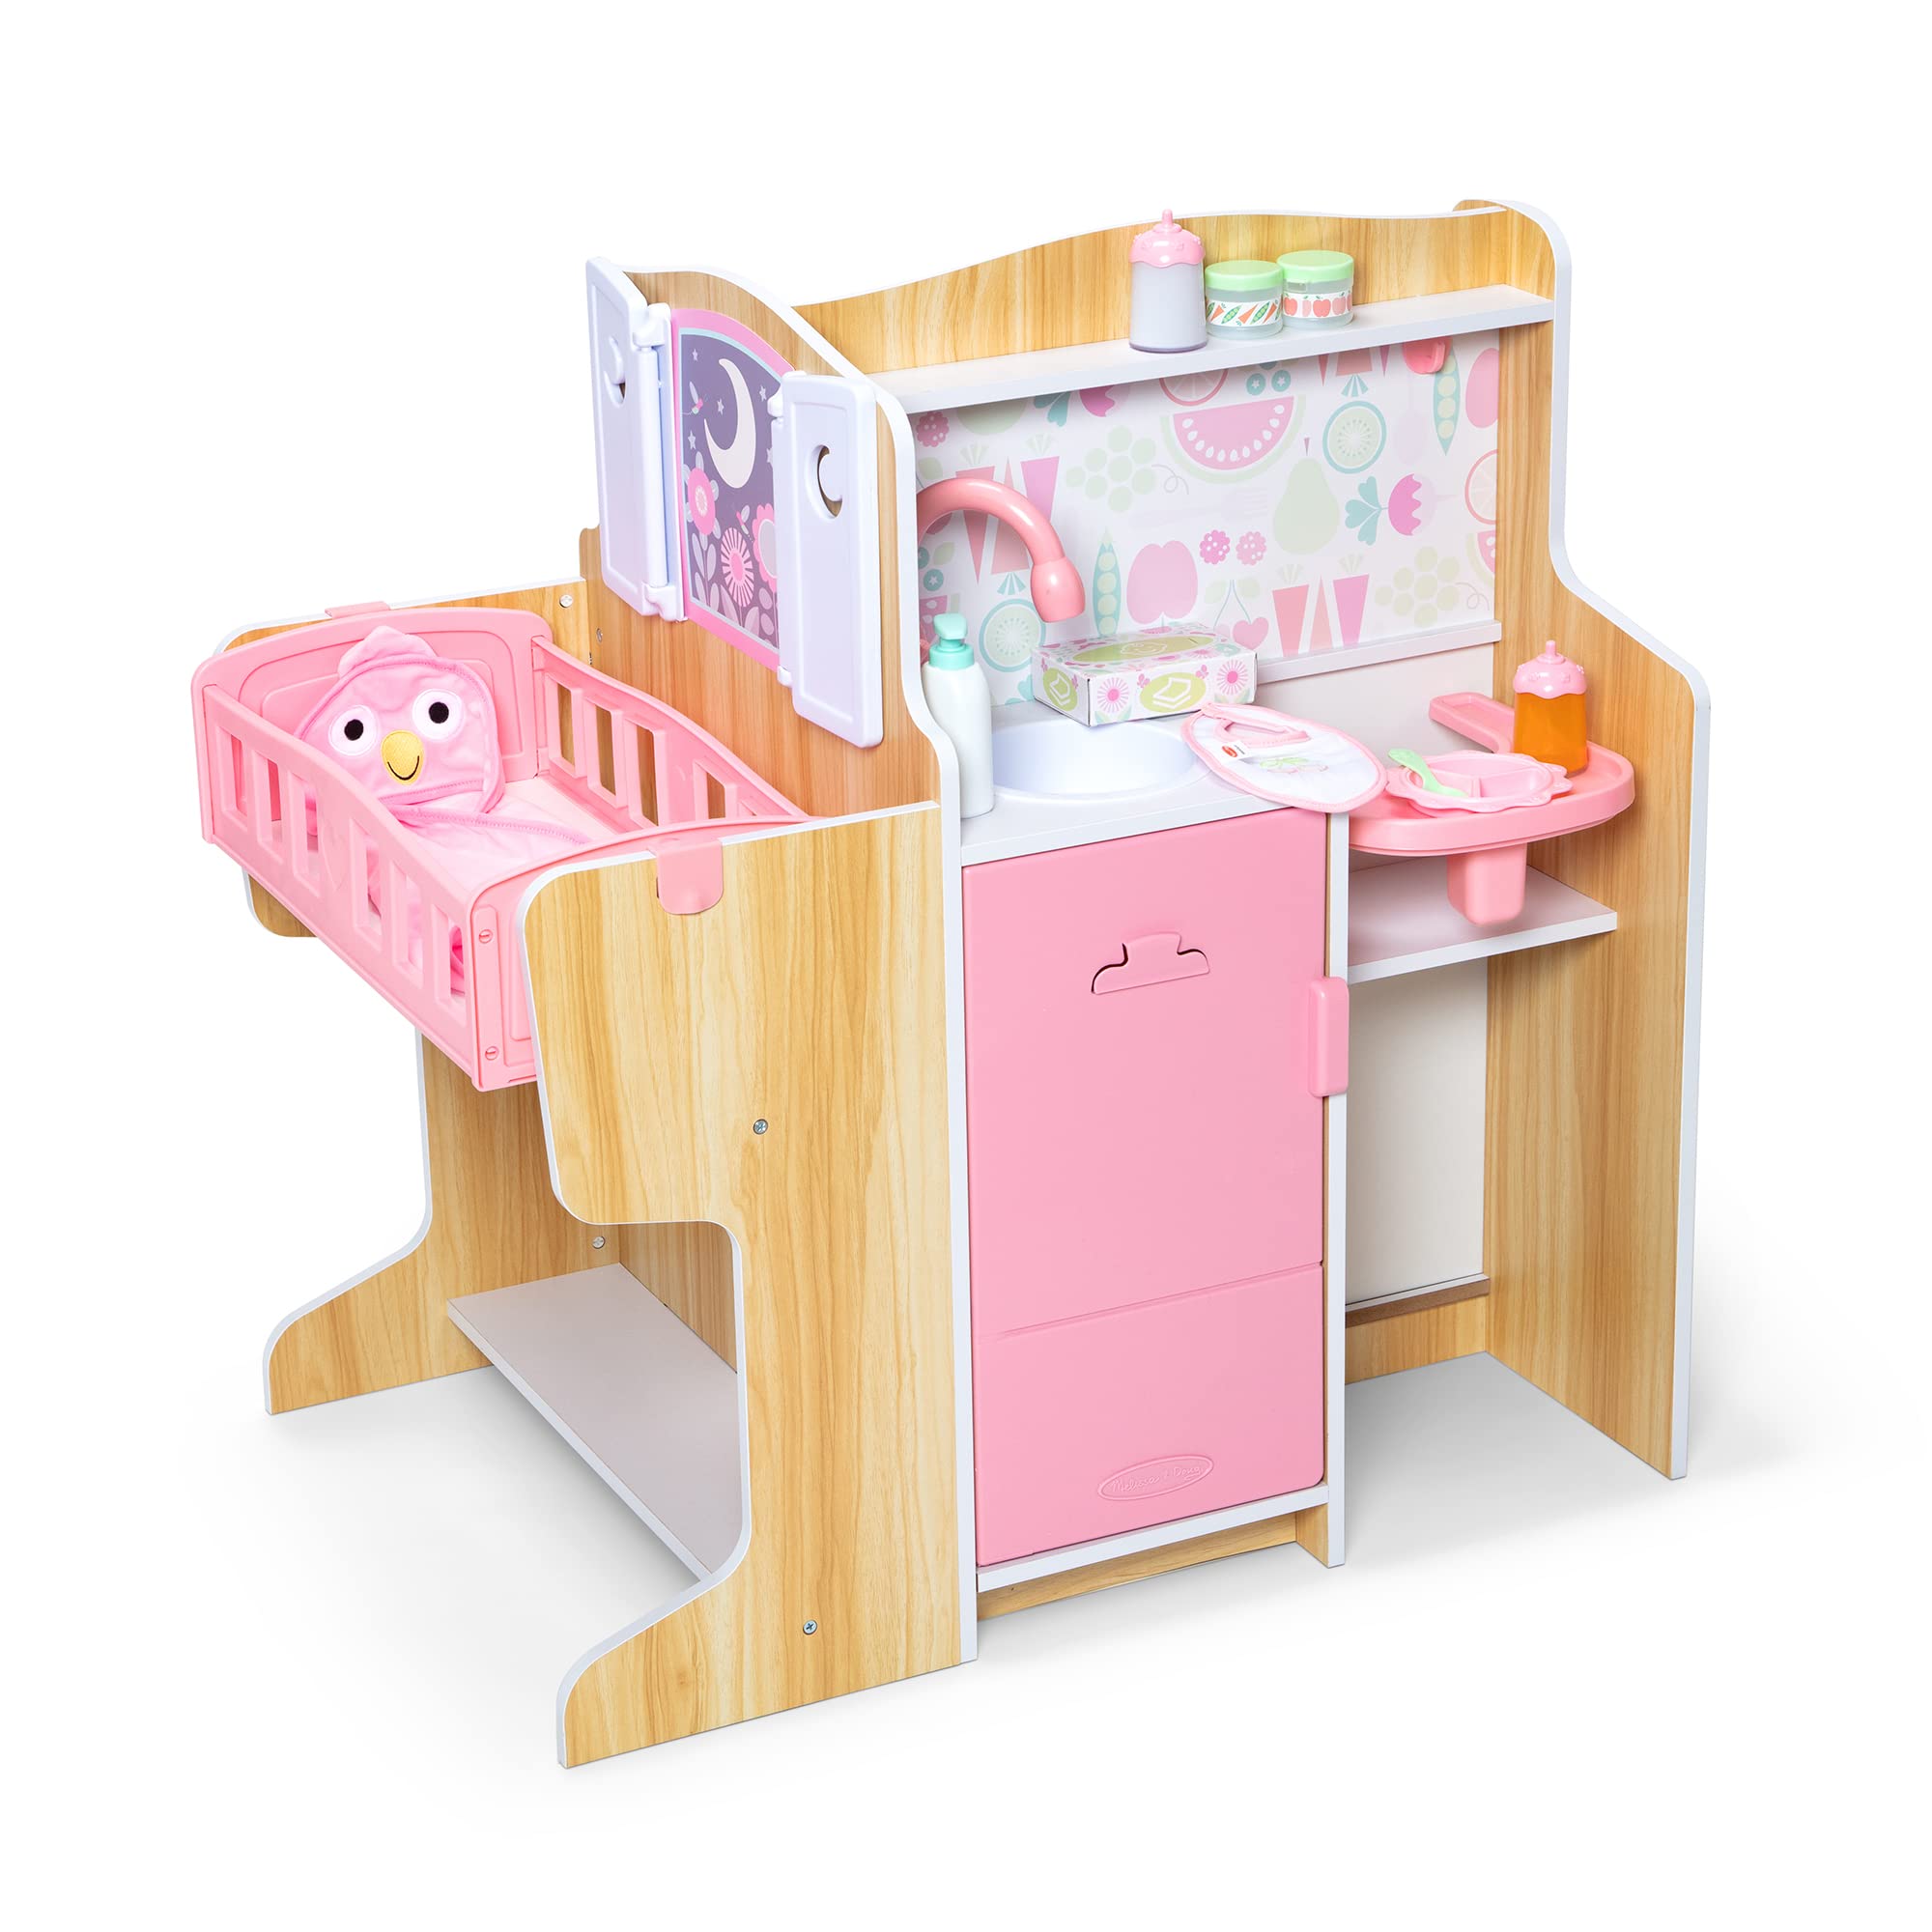 Melissa & Doug Baby Care Center and Accessory Sets